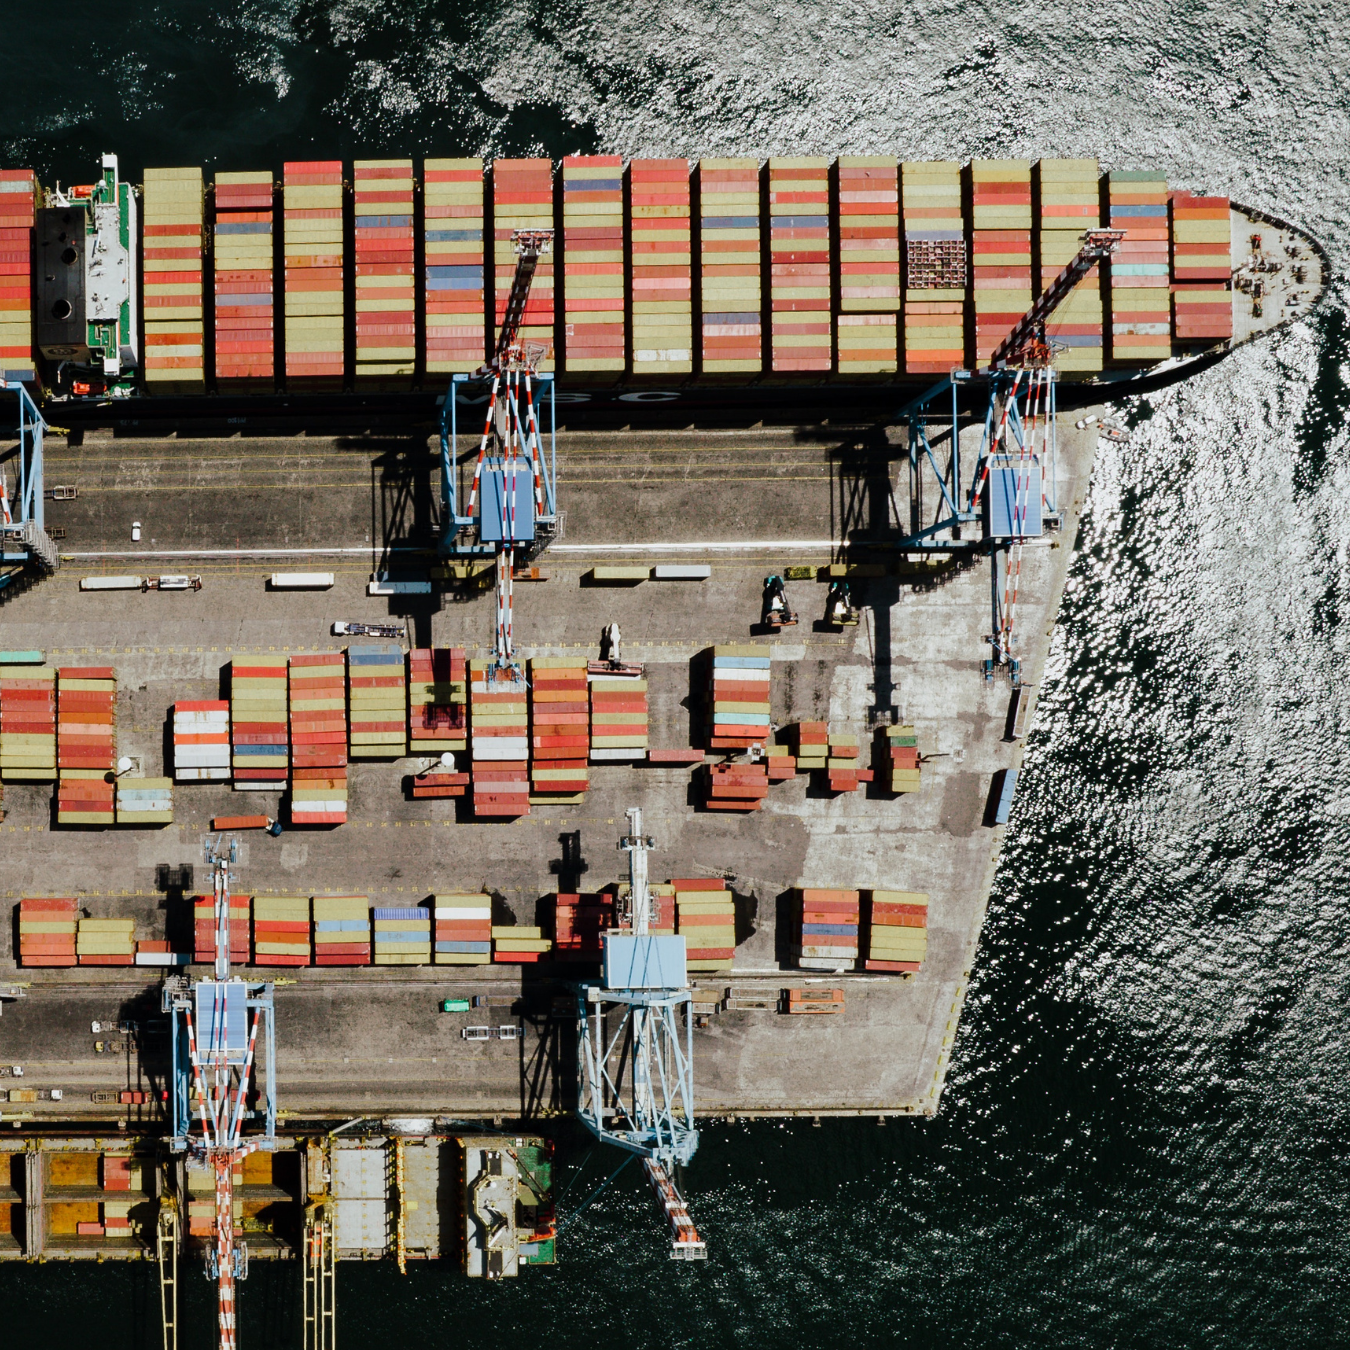 Aerial view looking down on a container ship being loaded at port.